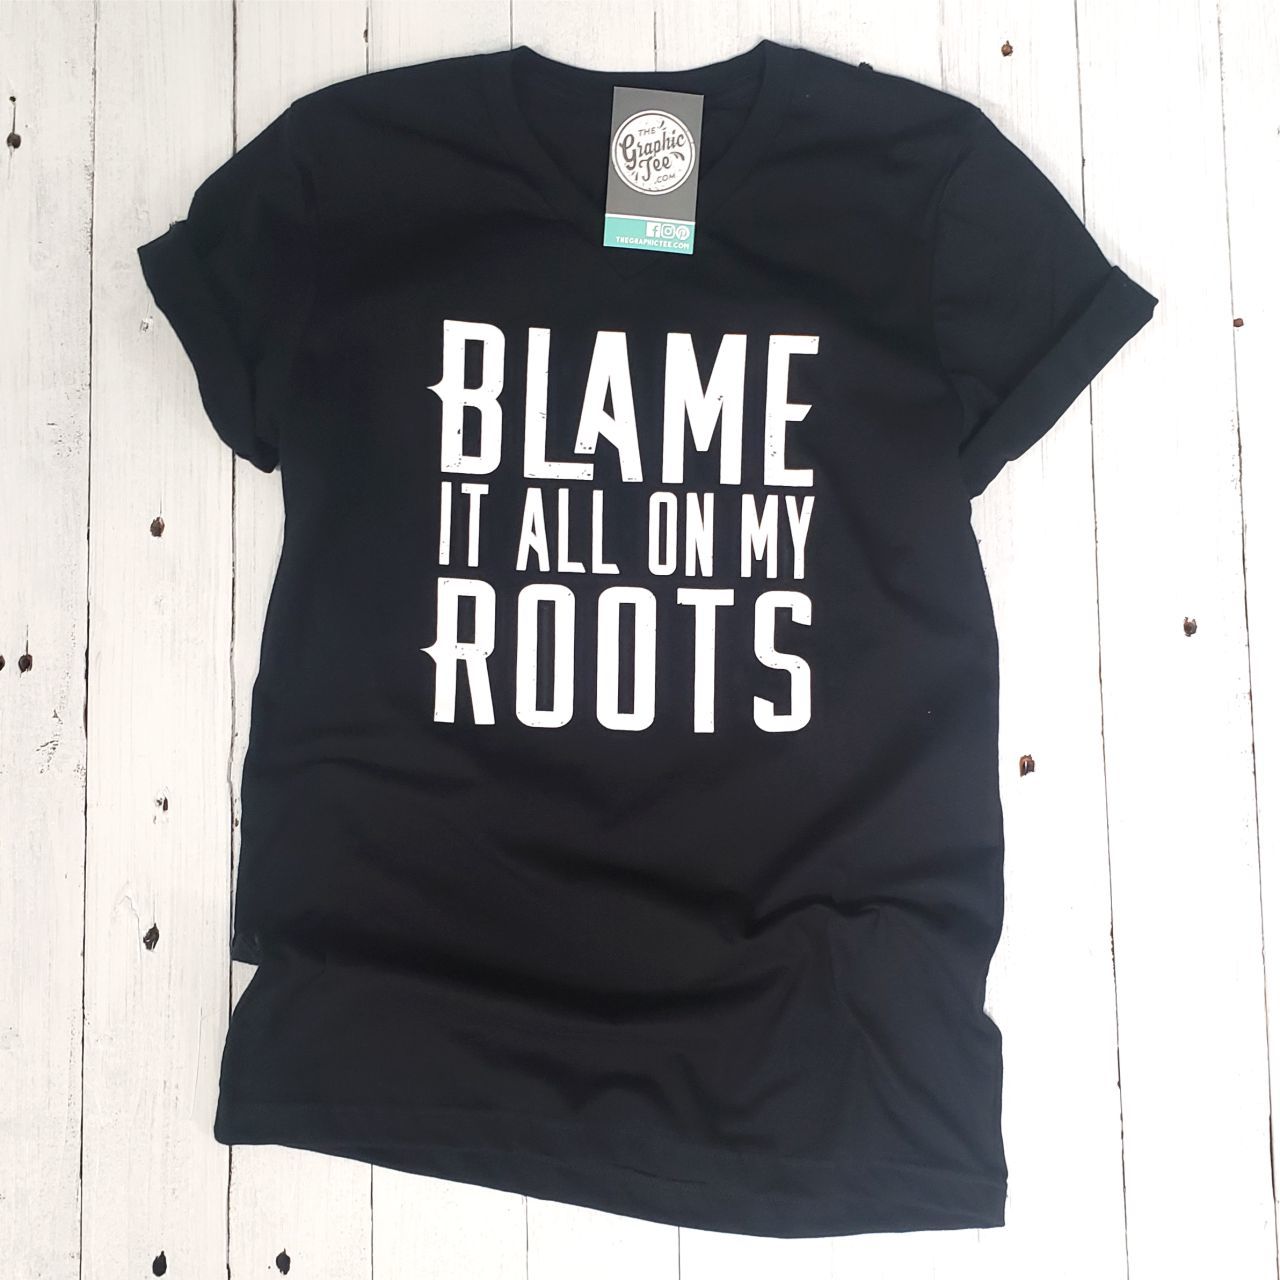 Blame it All On My Roots - Unisex V-Neck Tee - The Graphic Tee